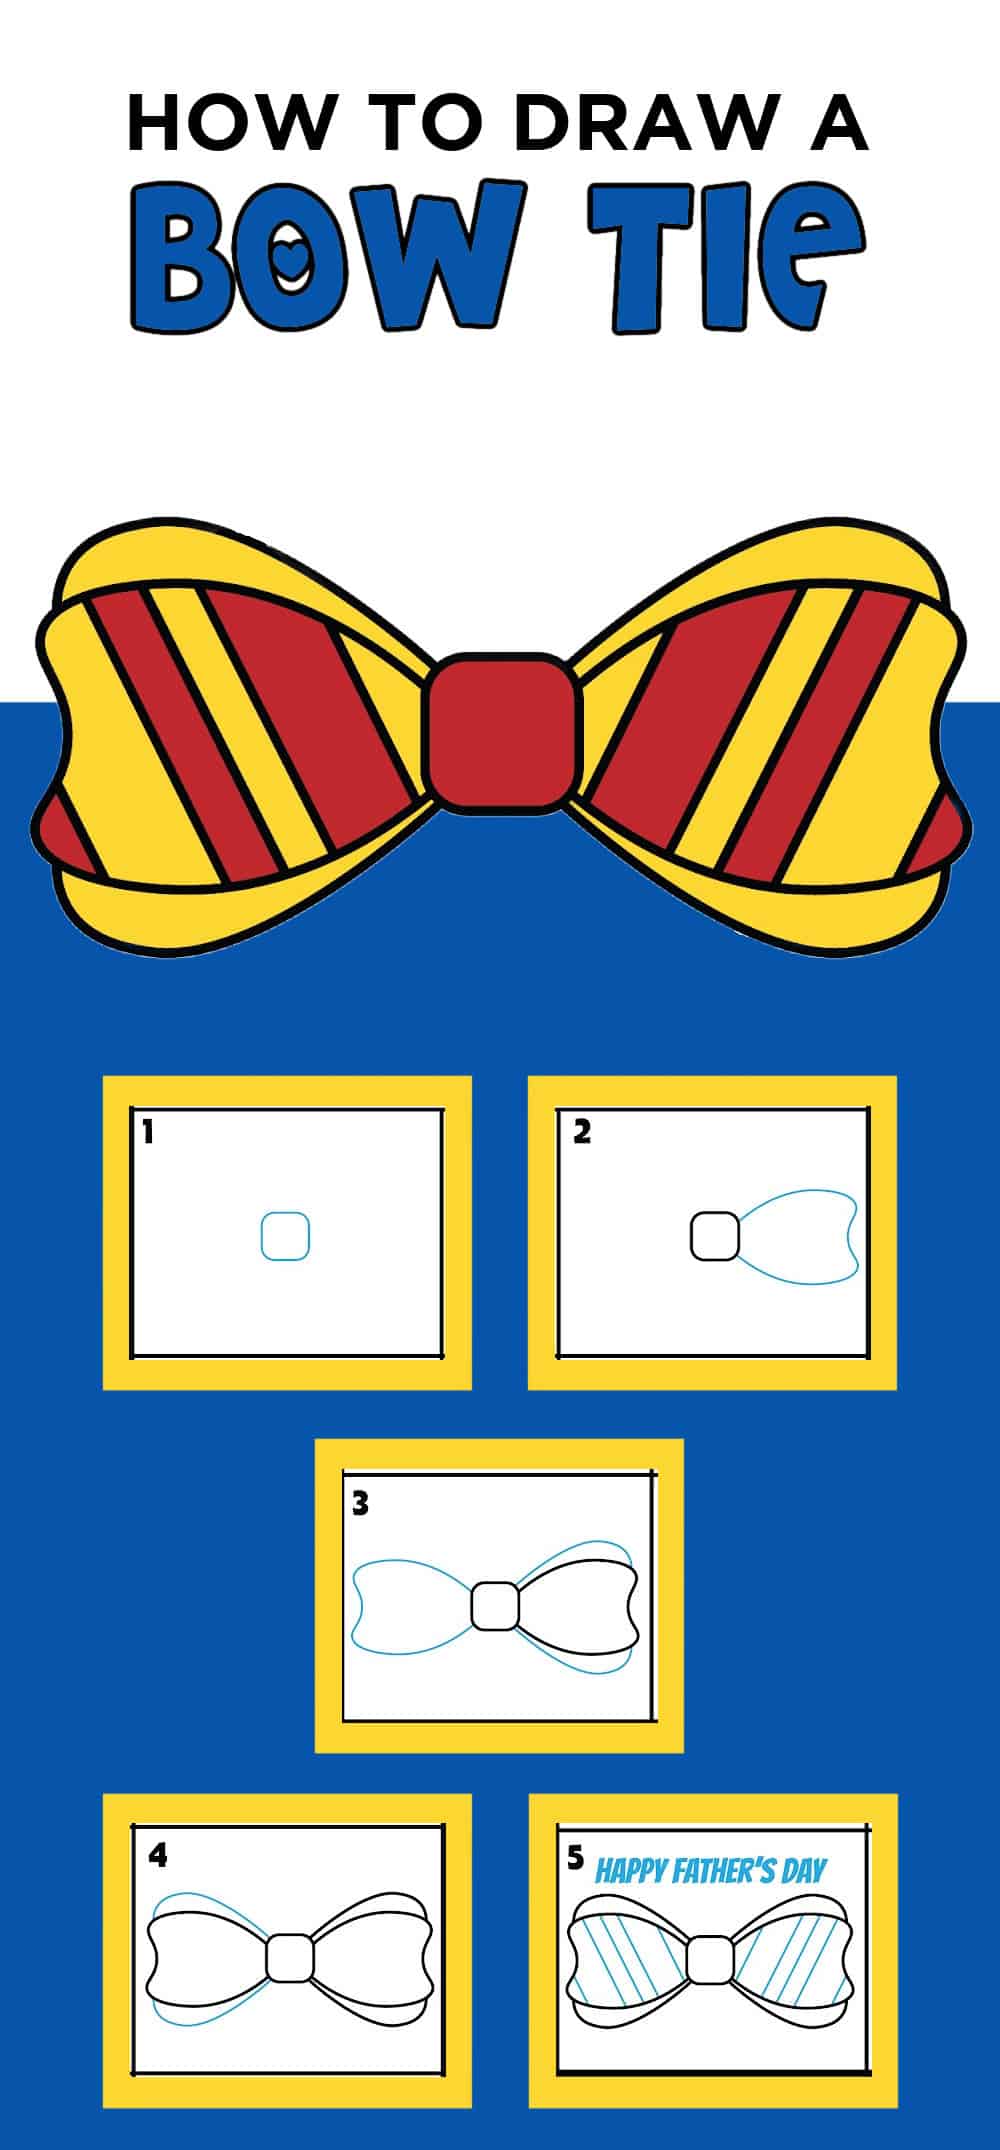 bowtie drawing